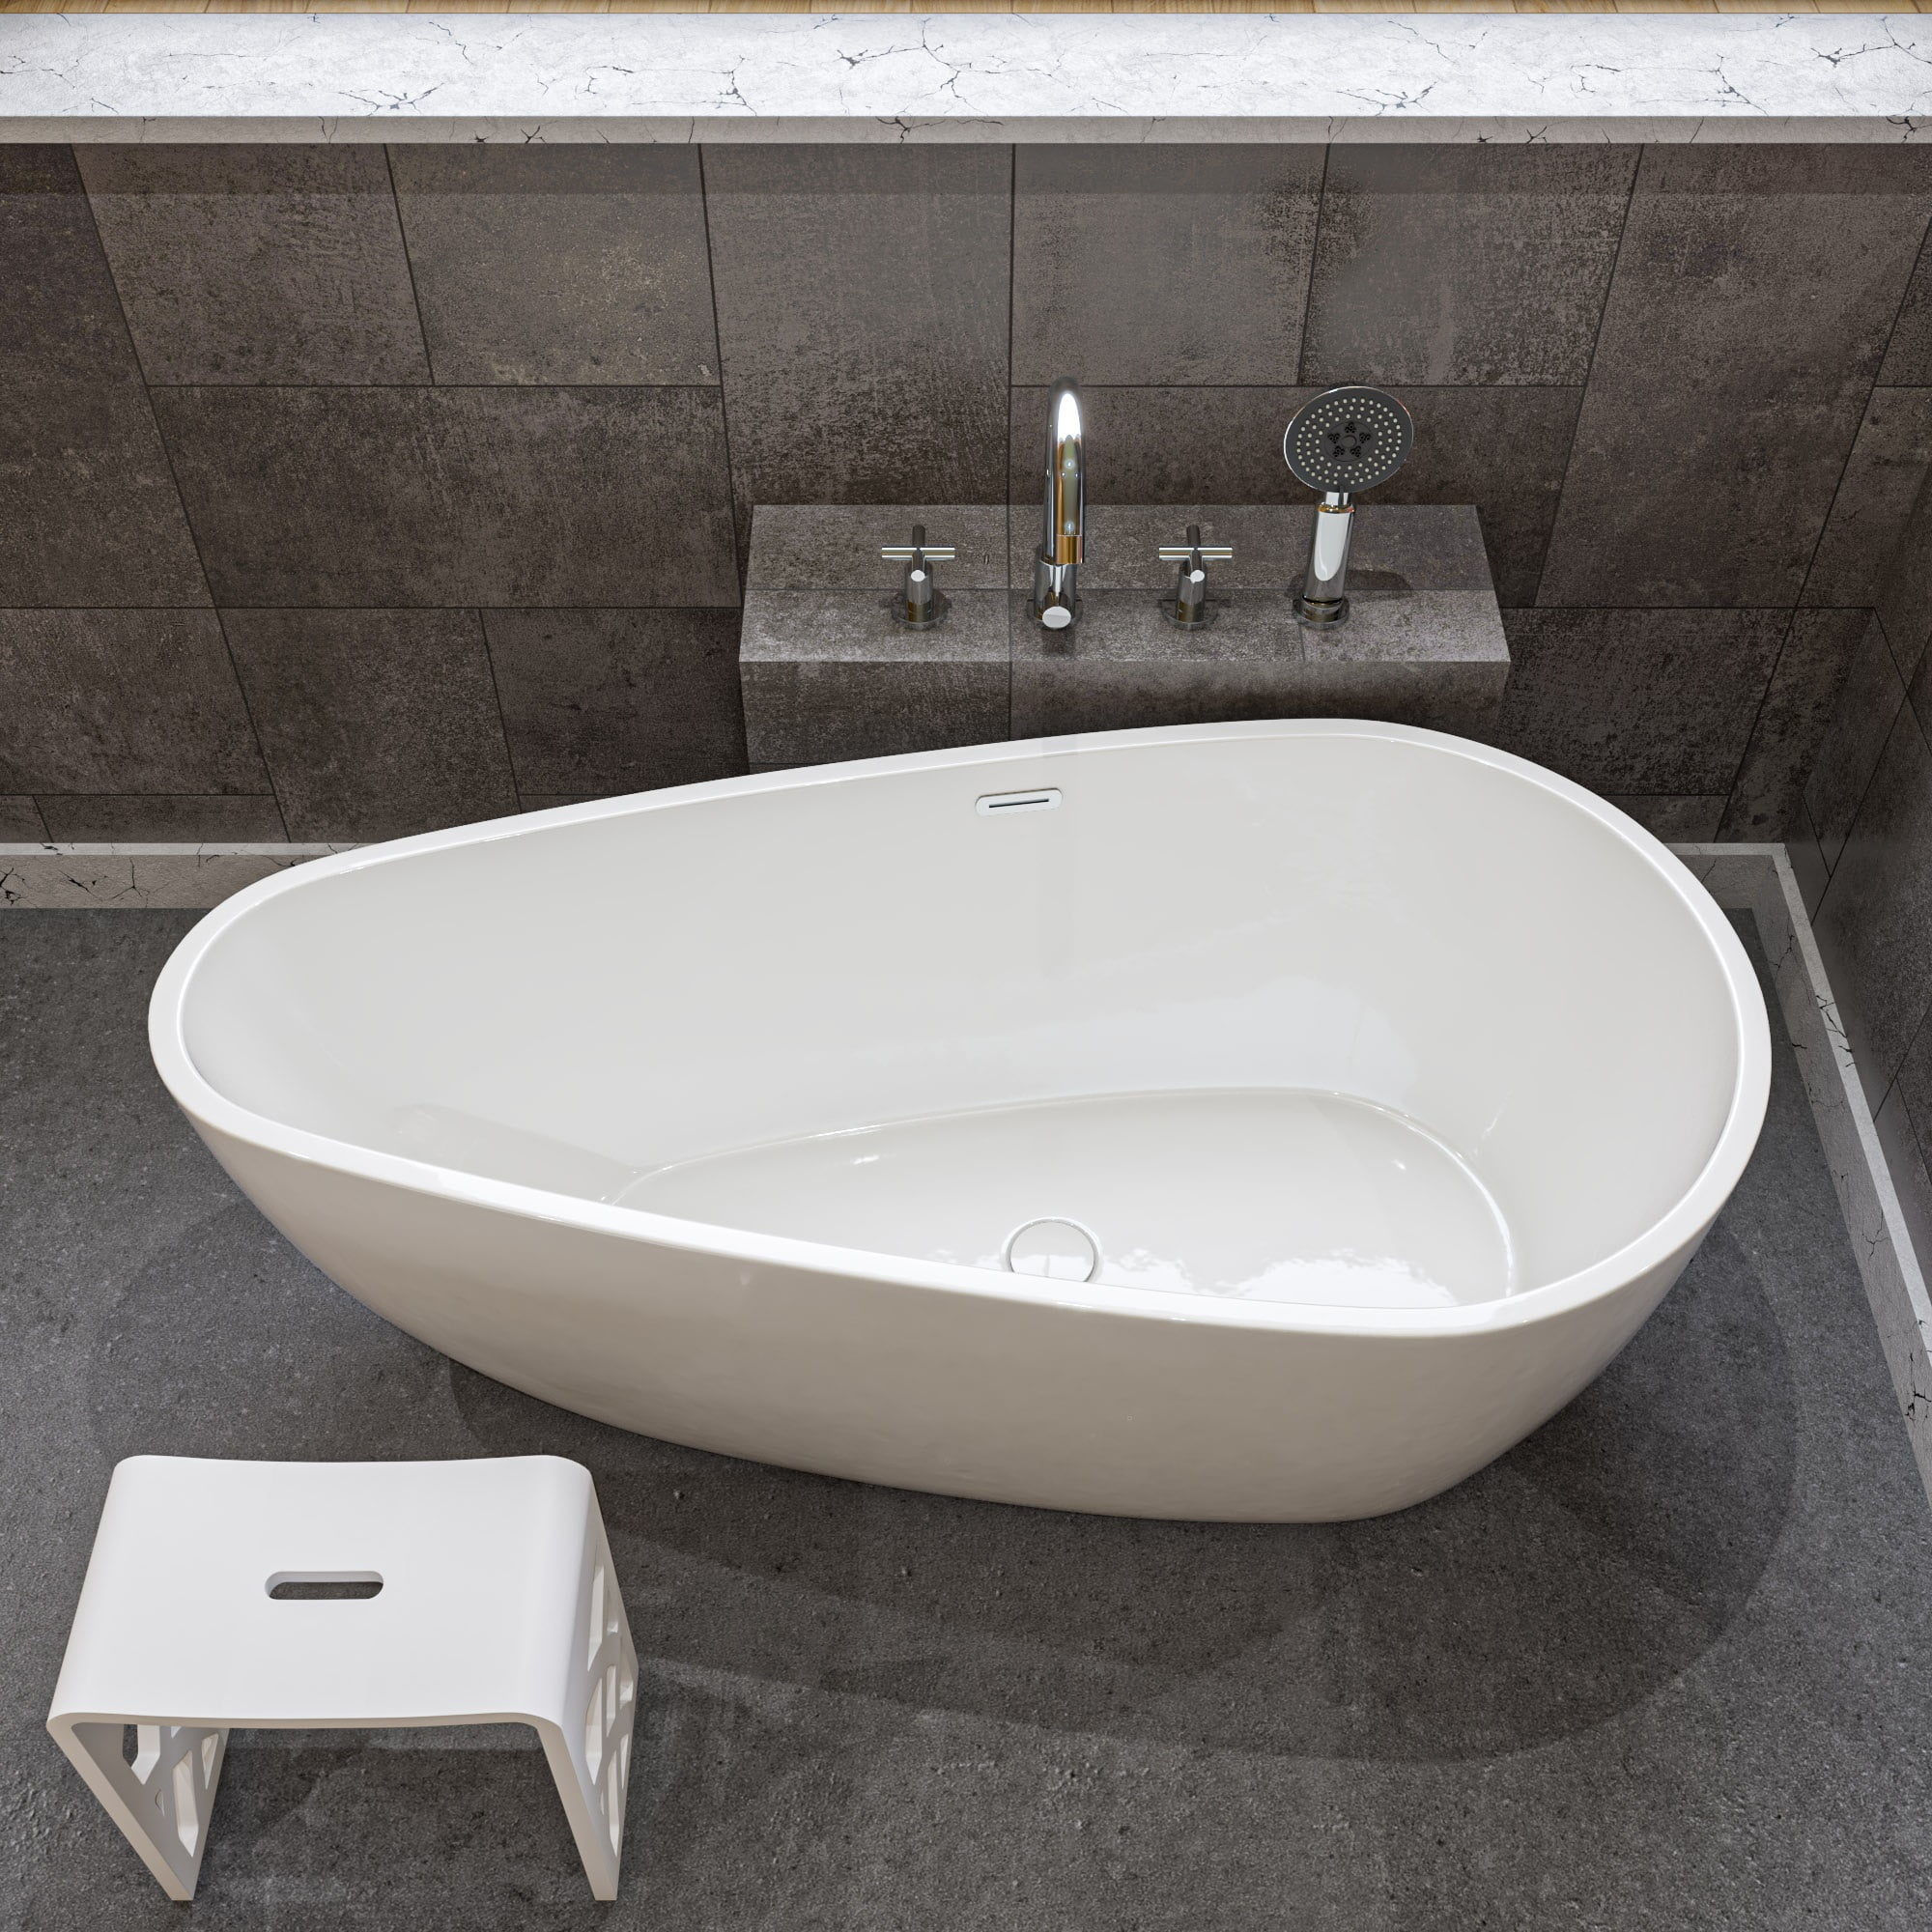 Picture of Alfi Brand AB8861 59 in. Oval Acrylic Free Standing Soaking Bathtub - White